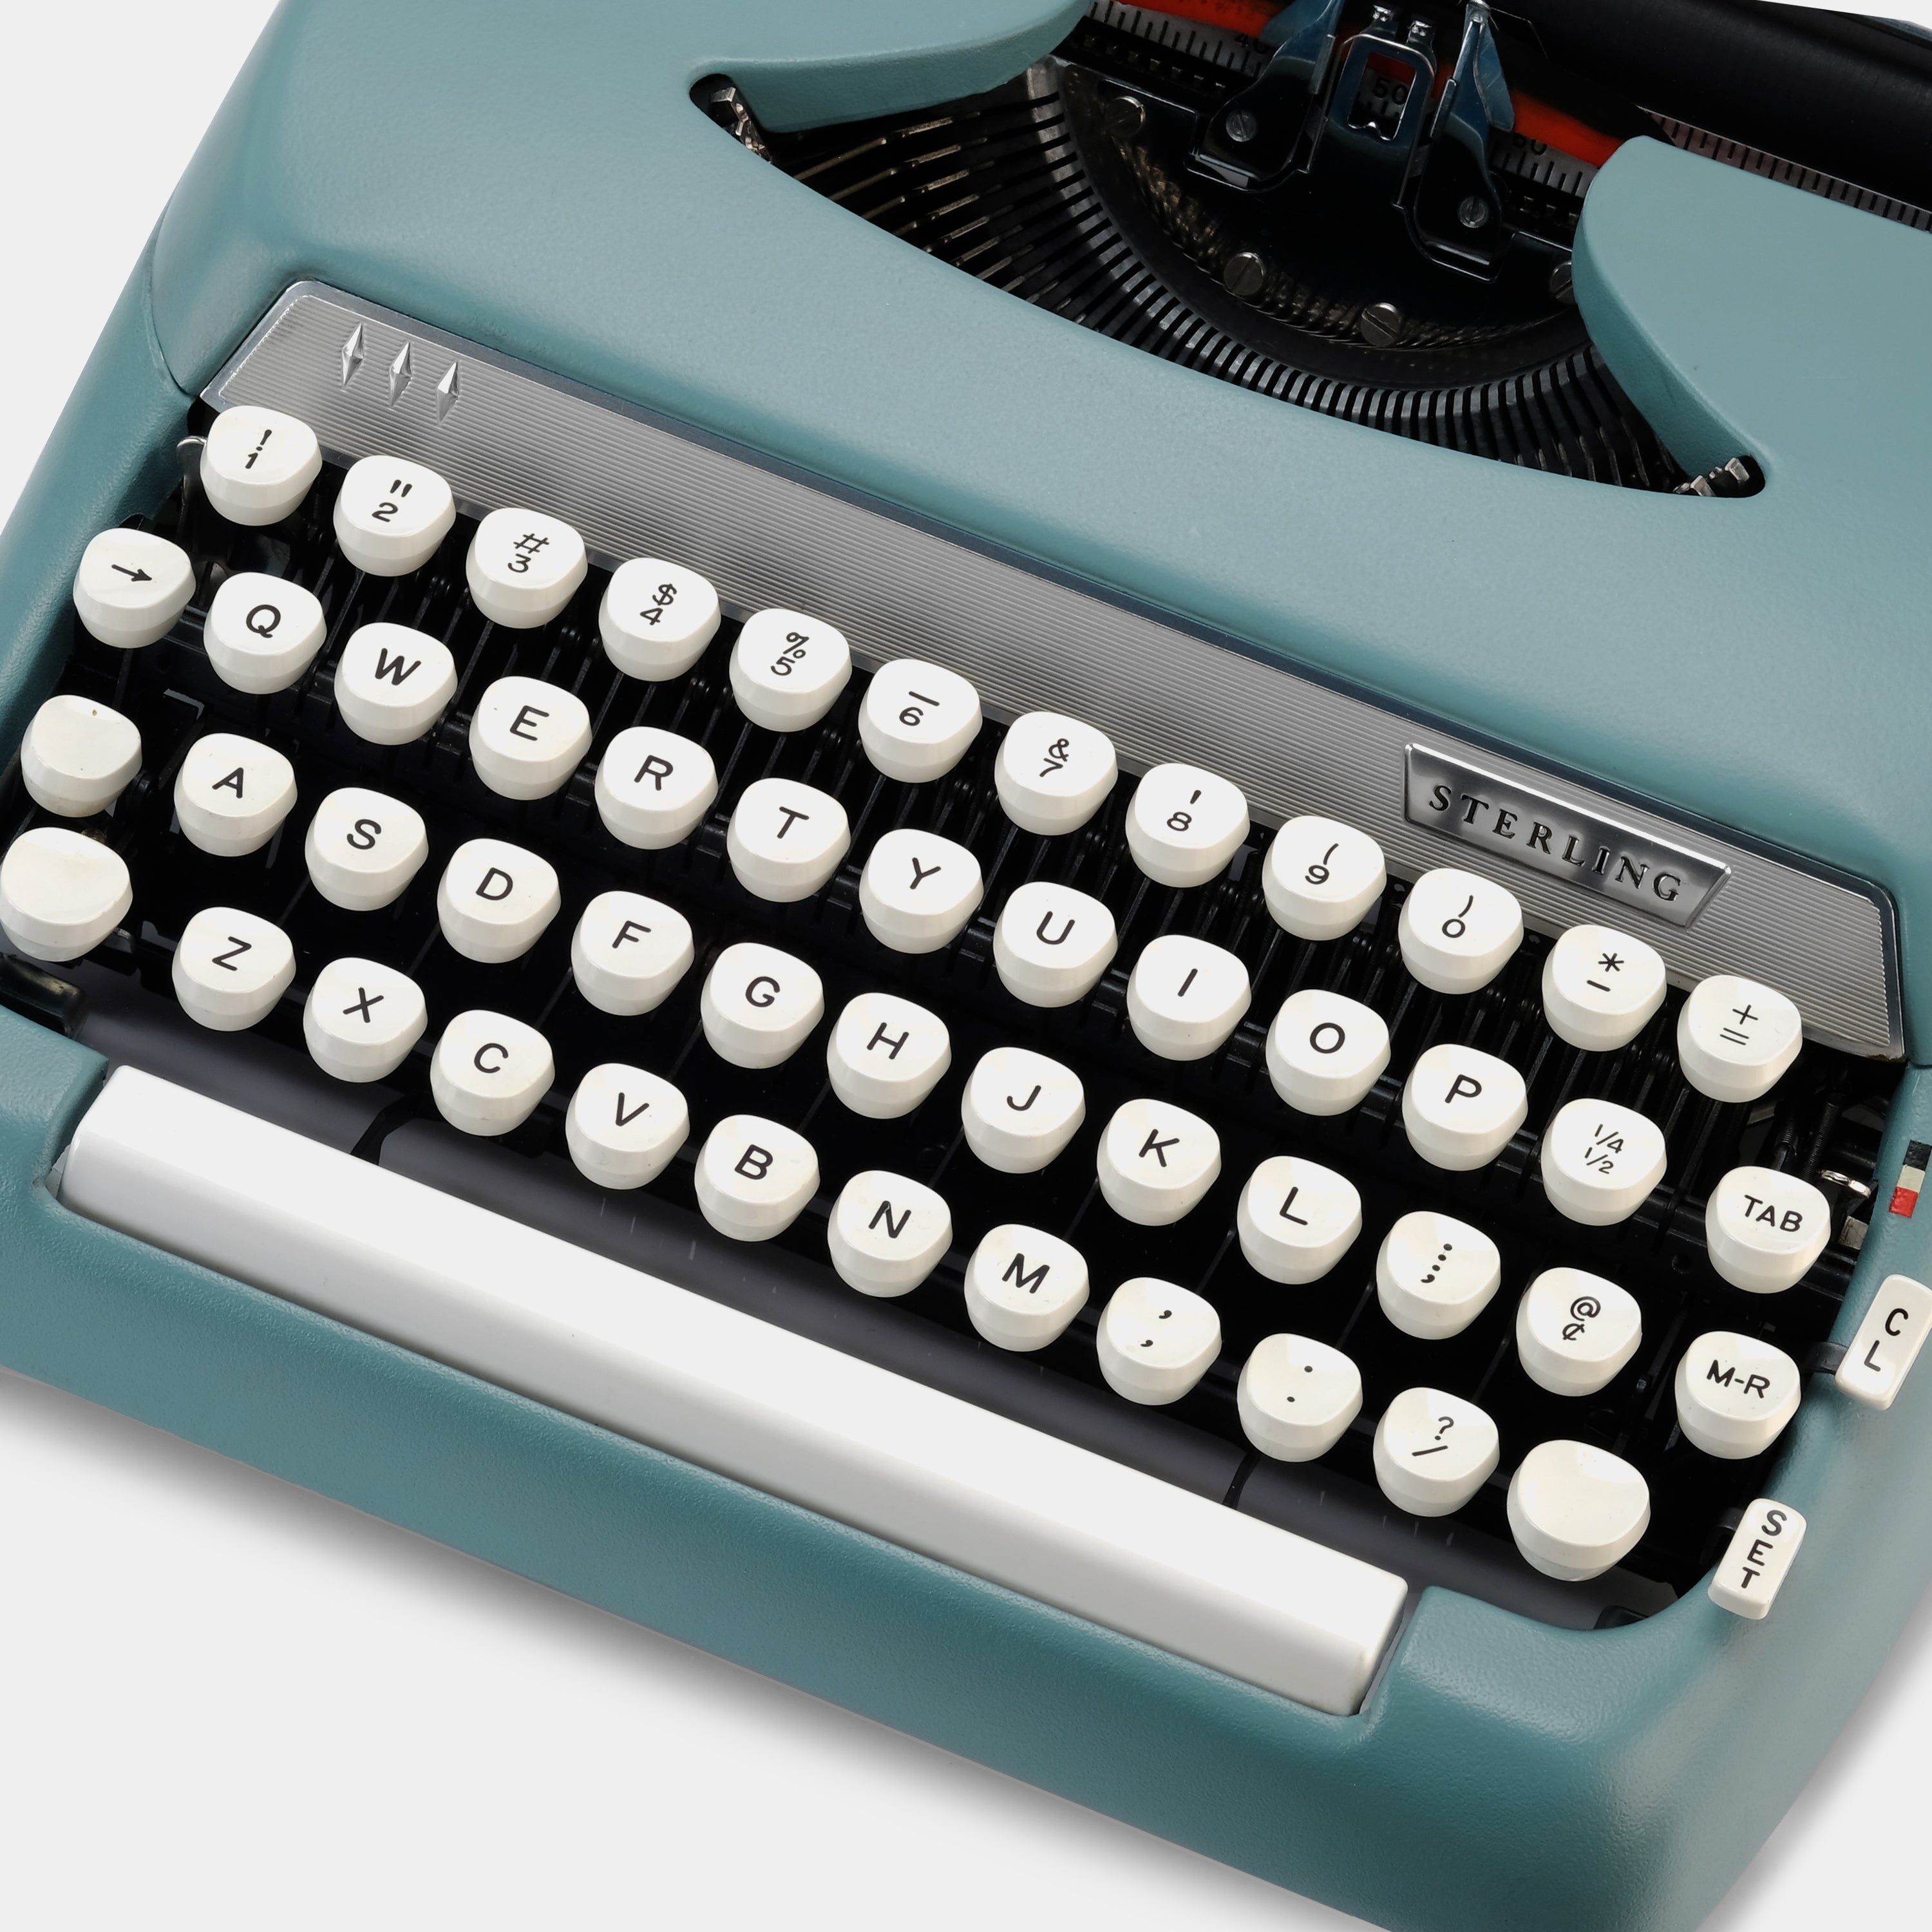 Smith-Corona Sterling Turquoise Manual Typewriter and Case